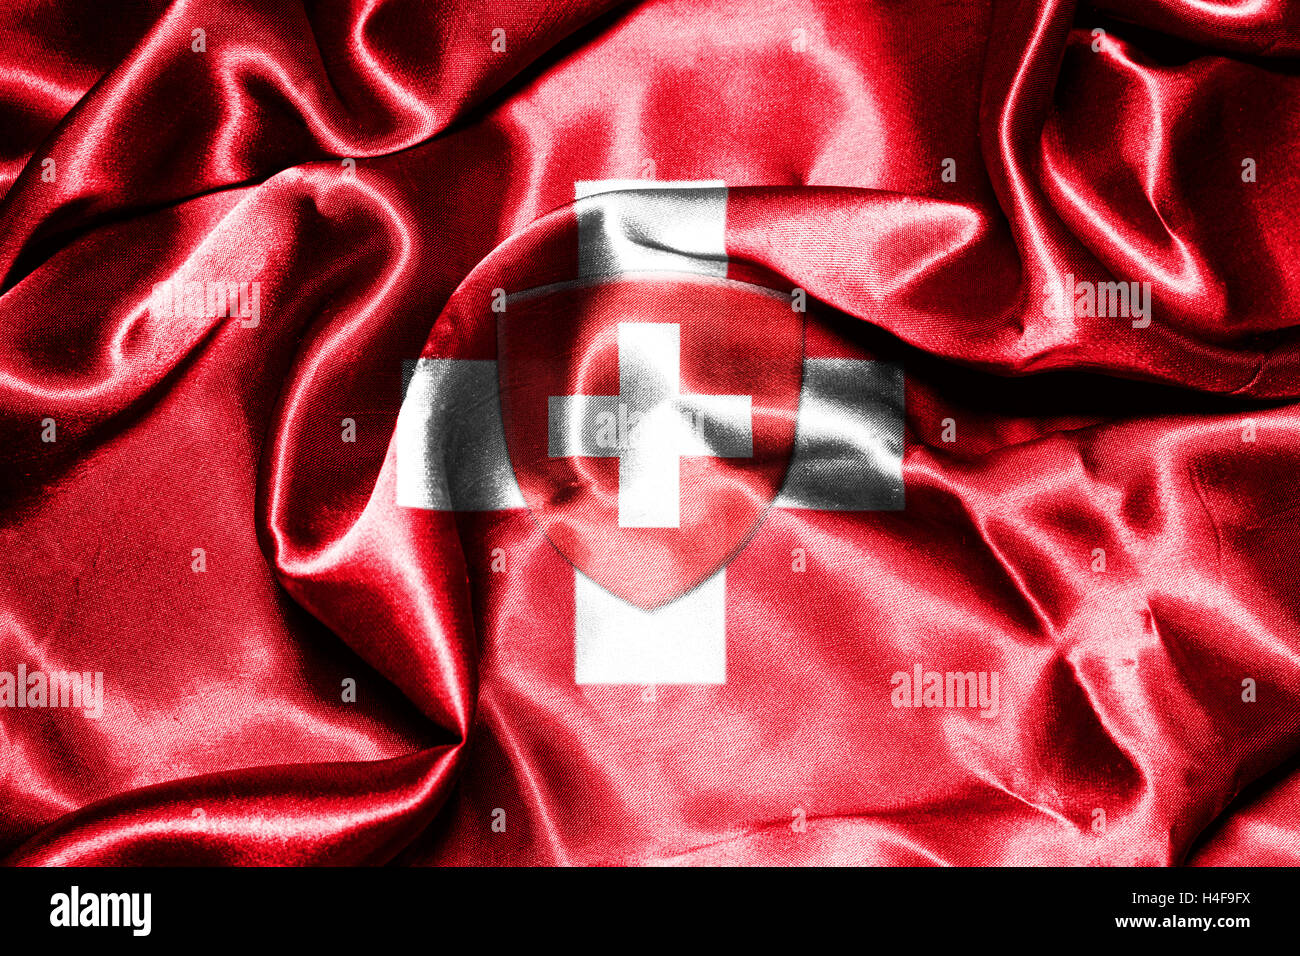 Switzerland National Flag With Coat Of Arms Stock Photo